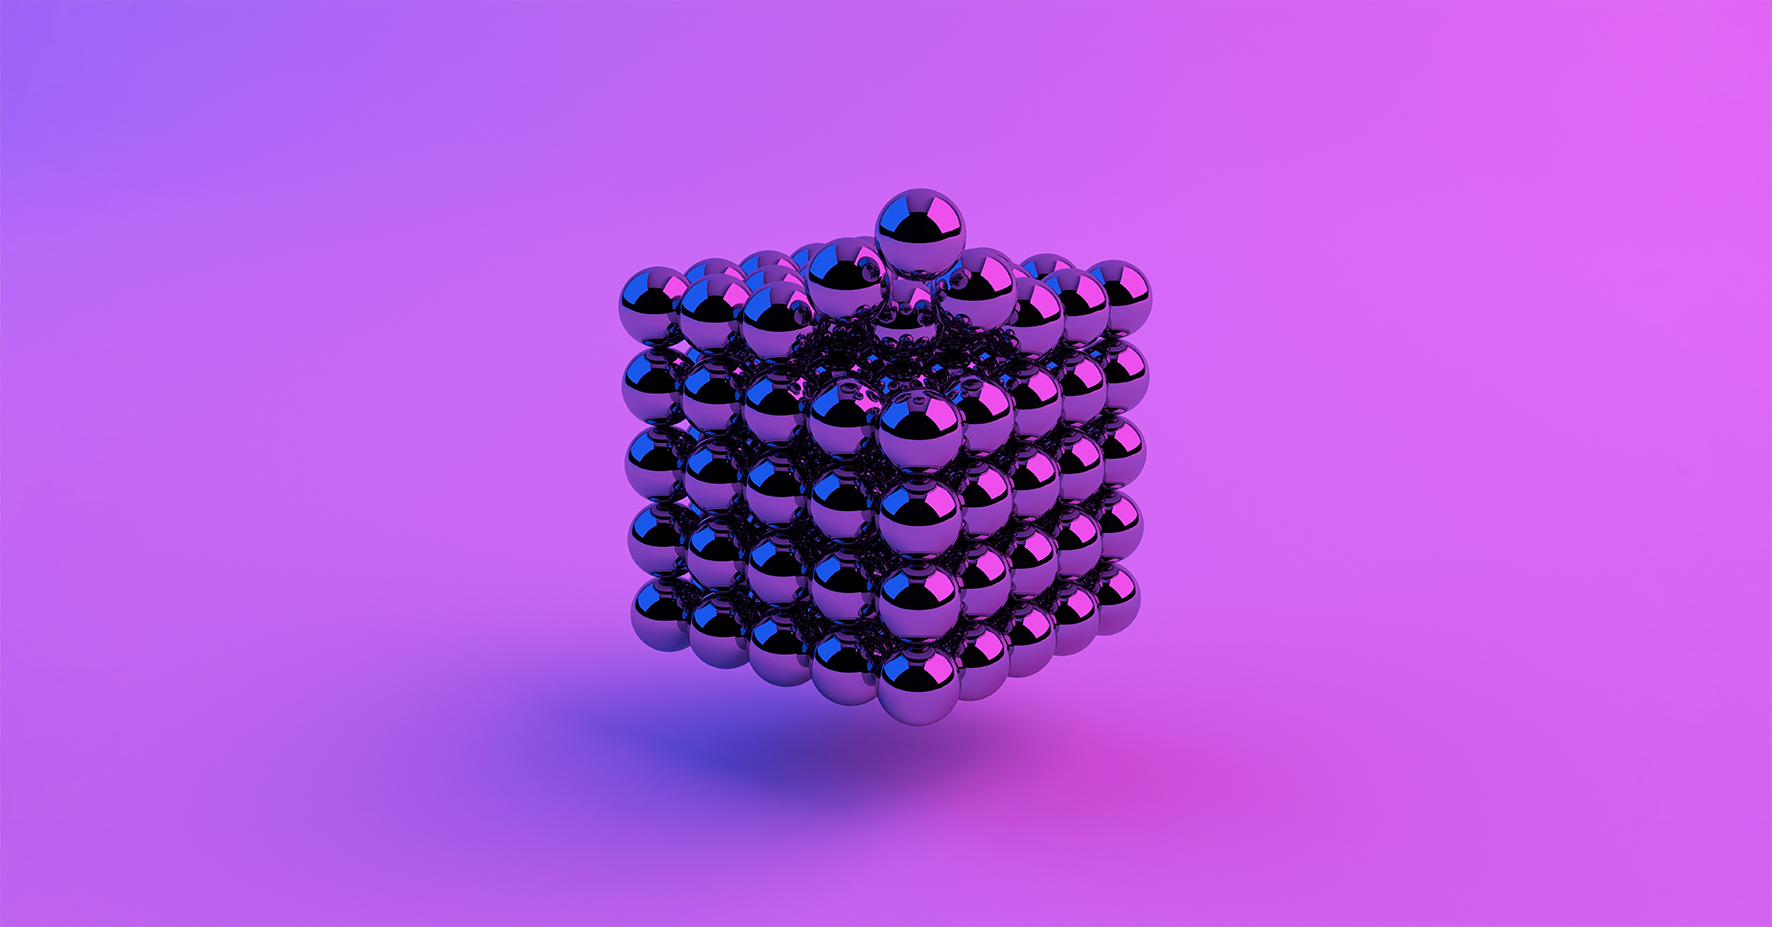 Cube made of metal balls, pink bue